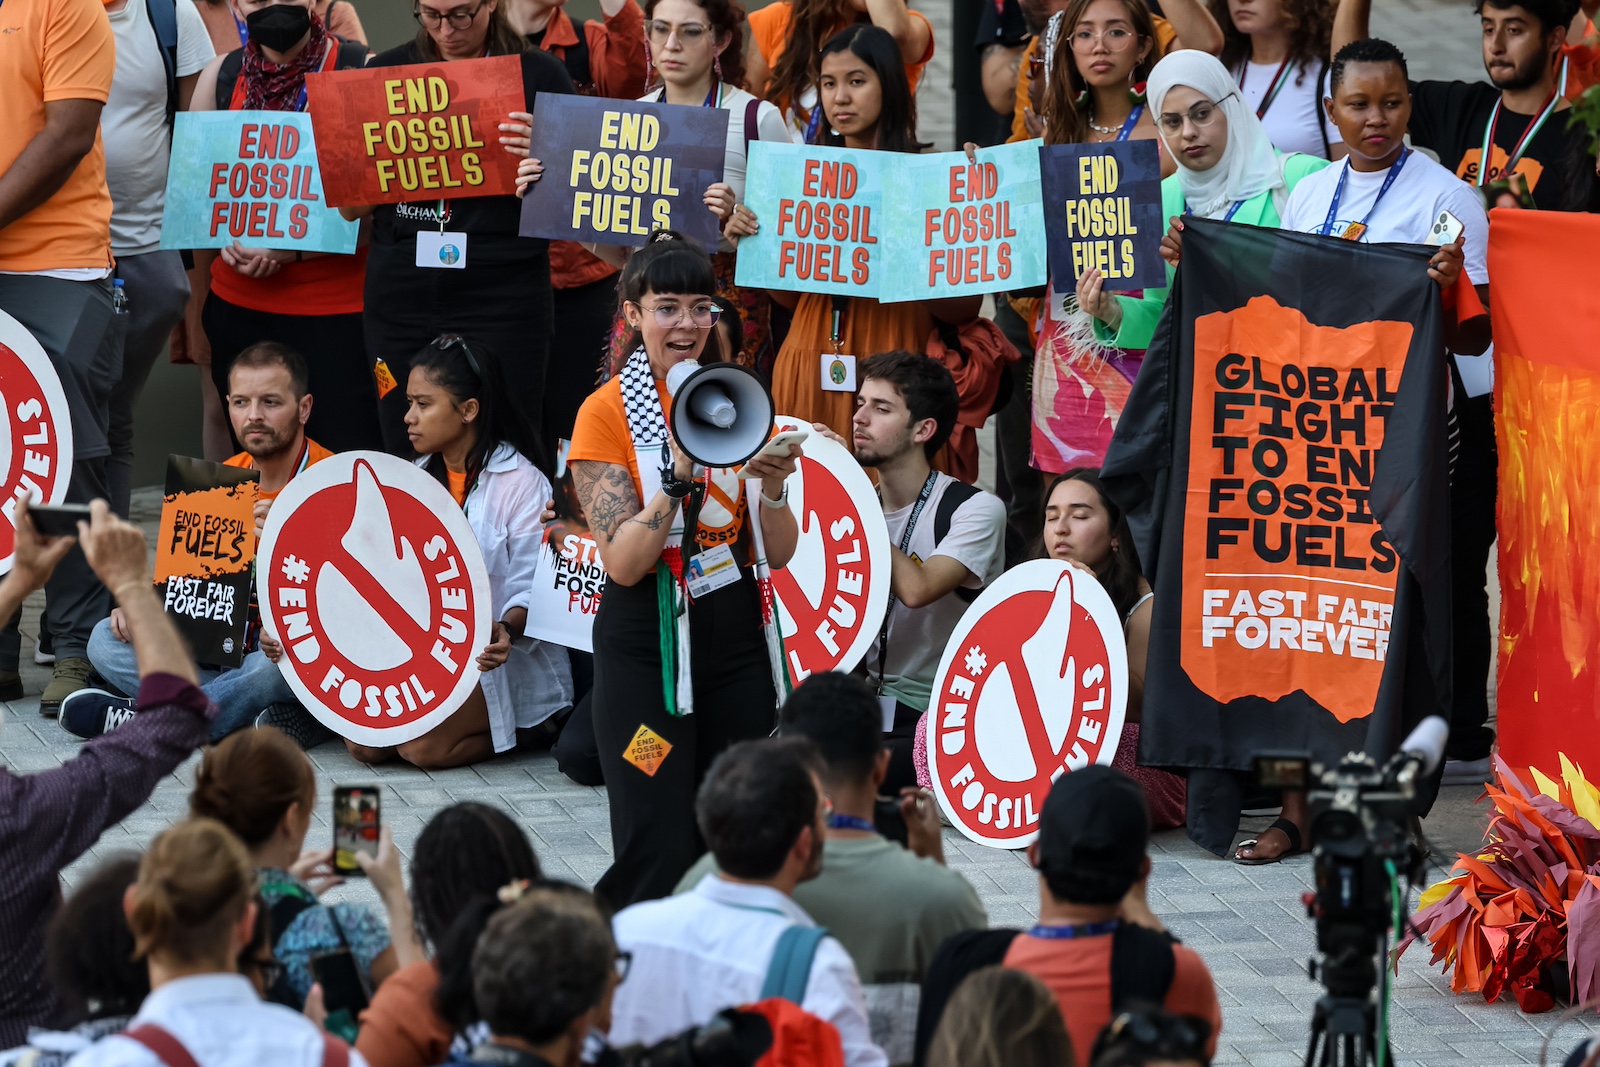 Participants stage a protest calling to phase out fossil fuels during the COP2